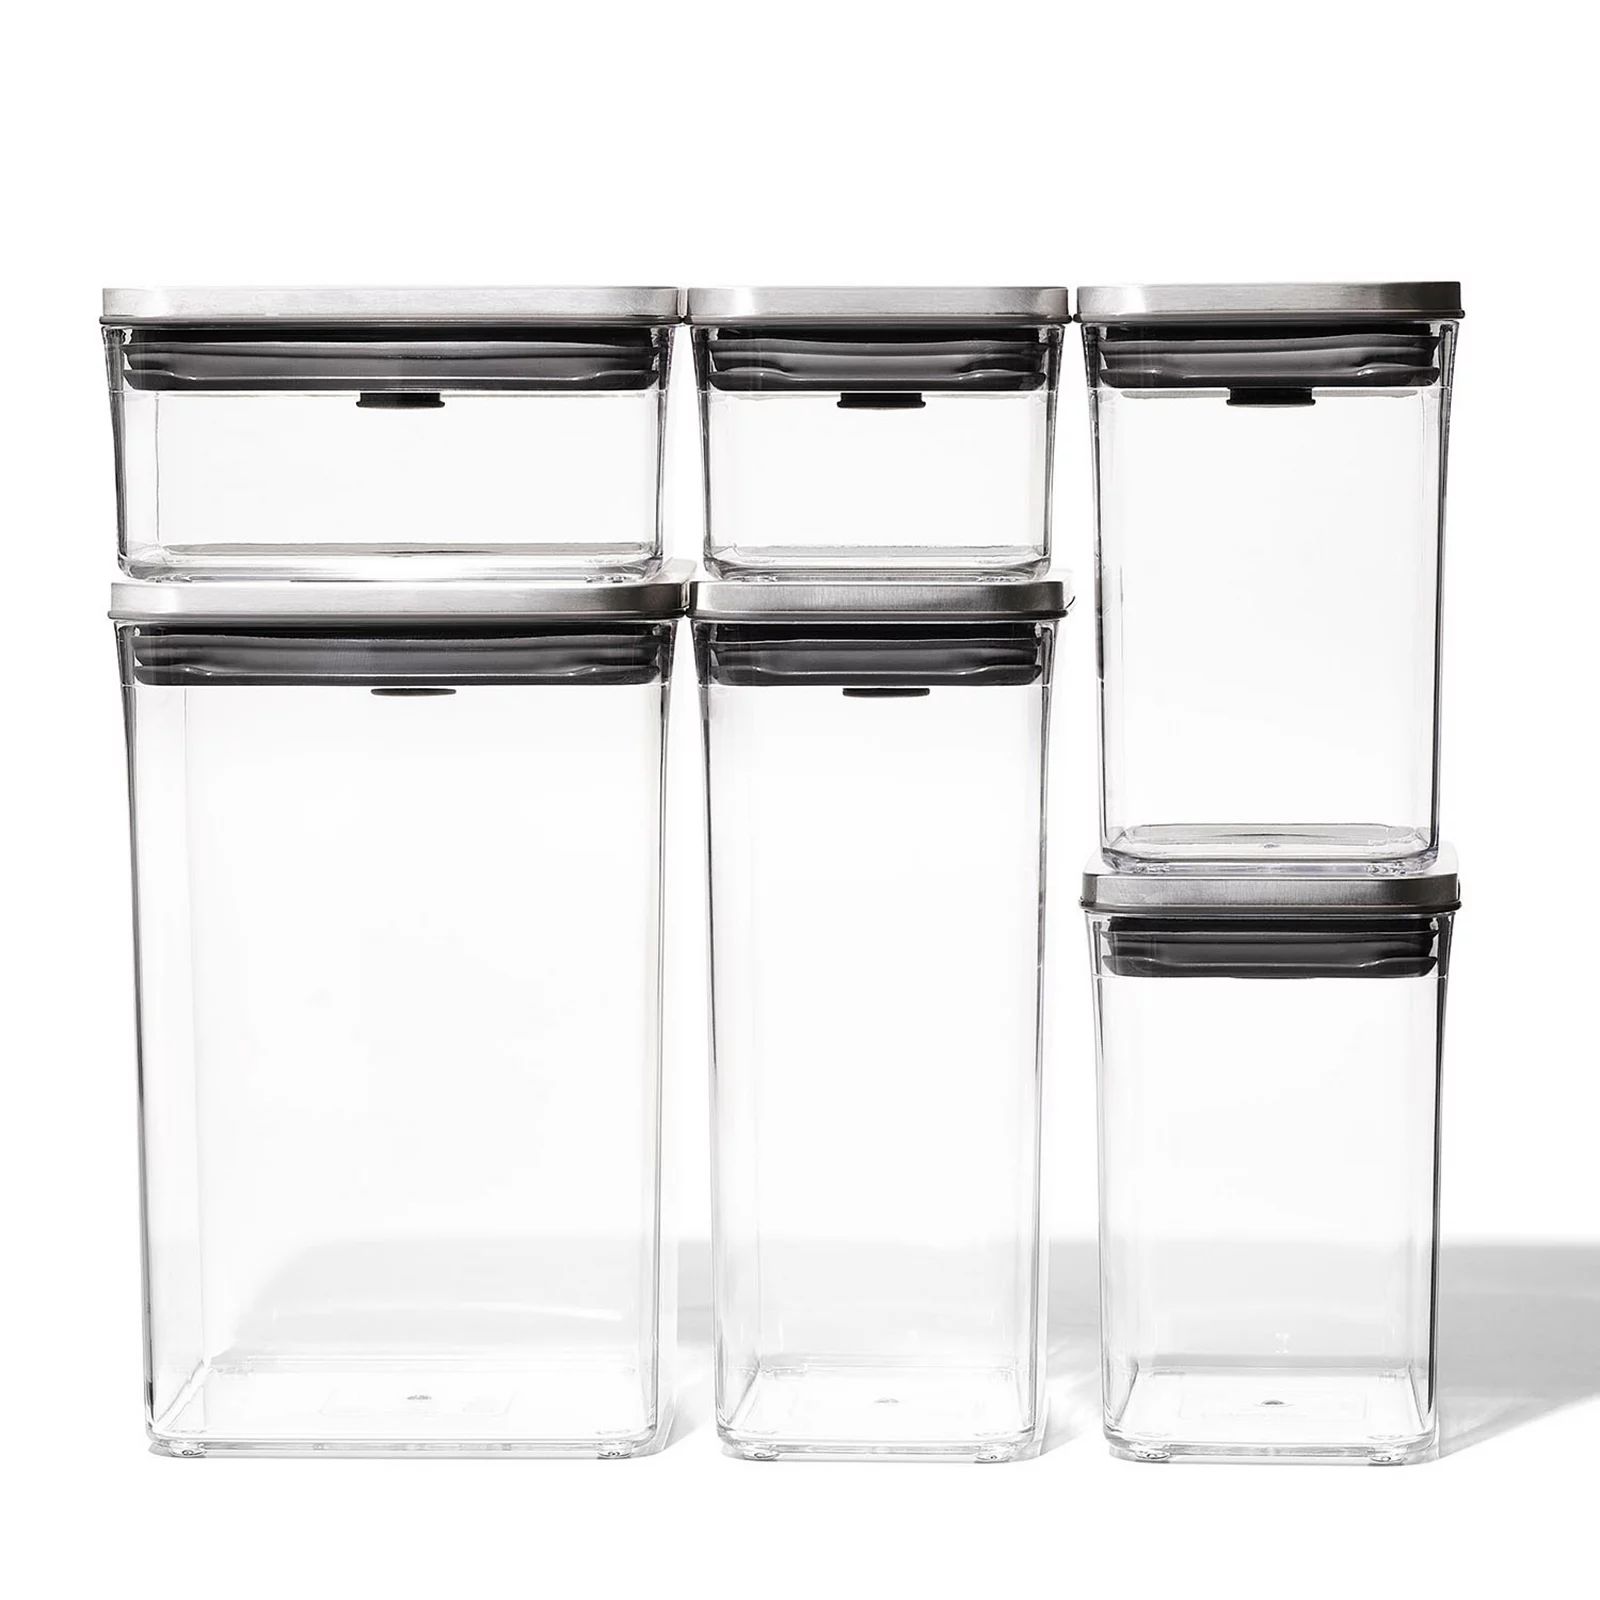 OXO SteeL POP 6 pc. Food Storage Container Set, Multicolor | Kohl's